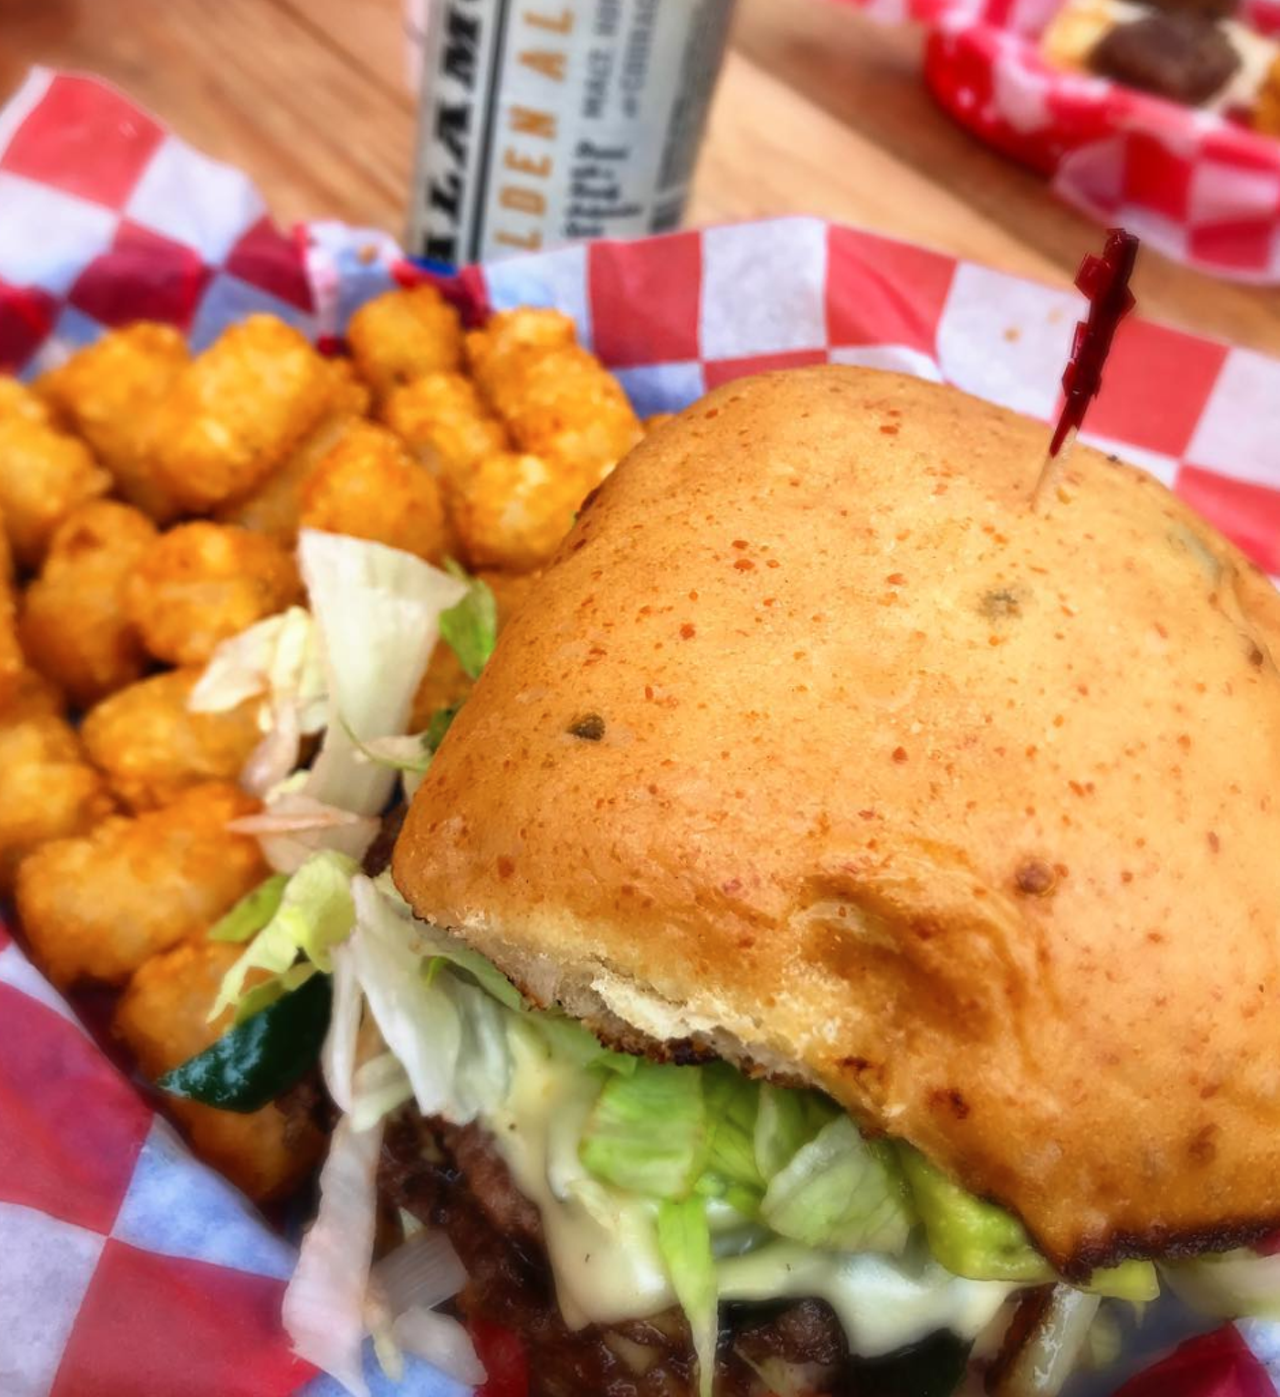 Order the Hub Cap Burger and you’ll have to get through three whole pounds of meaty goodness. Don’t worry, you’ll enjoy yourself through every bite. Plus there’s live music and a play area for the kids to enjoy while you stuff your face.
Photo via Instagram / fveragood